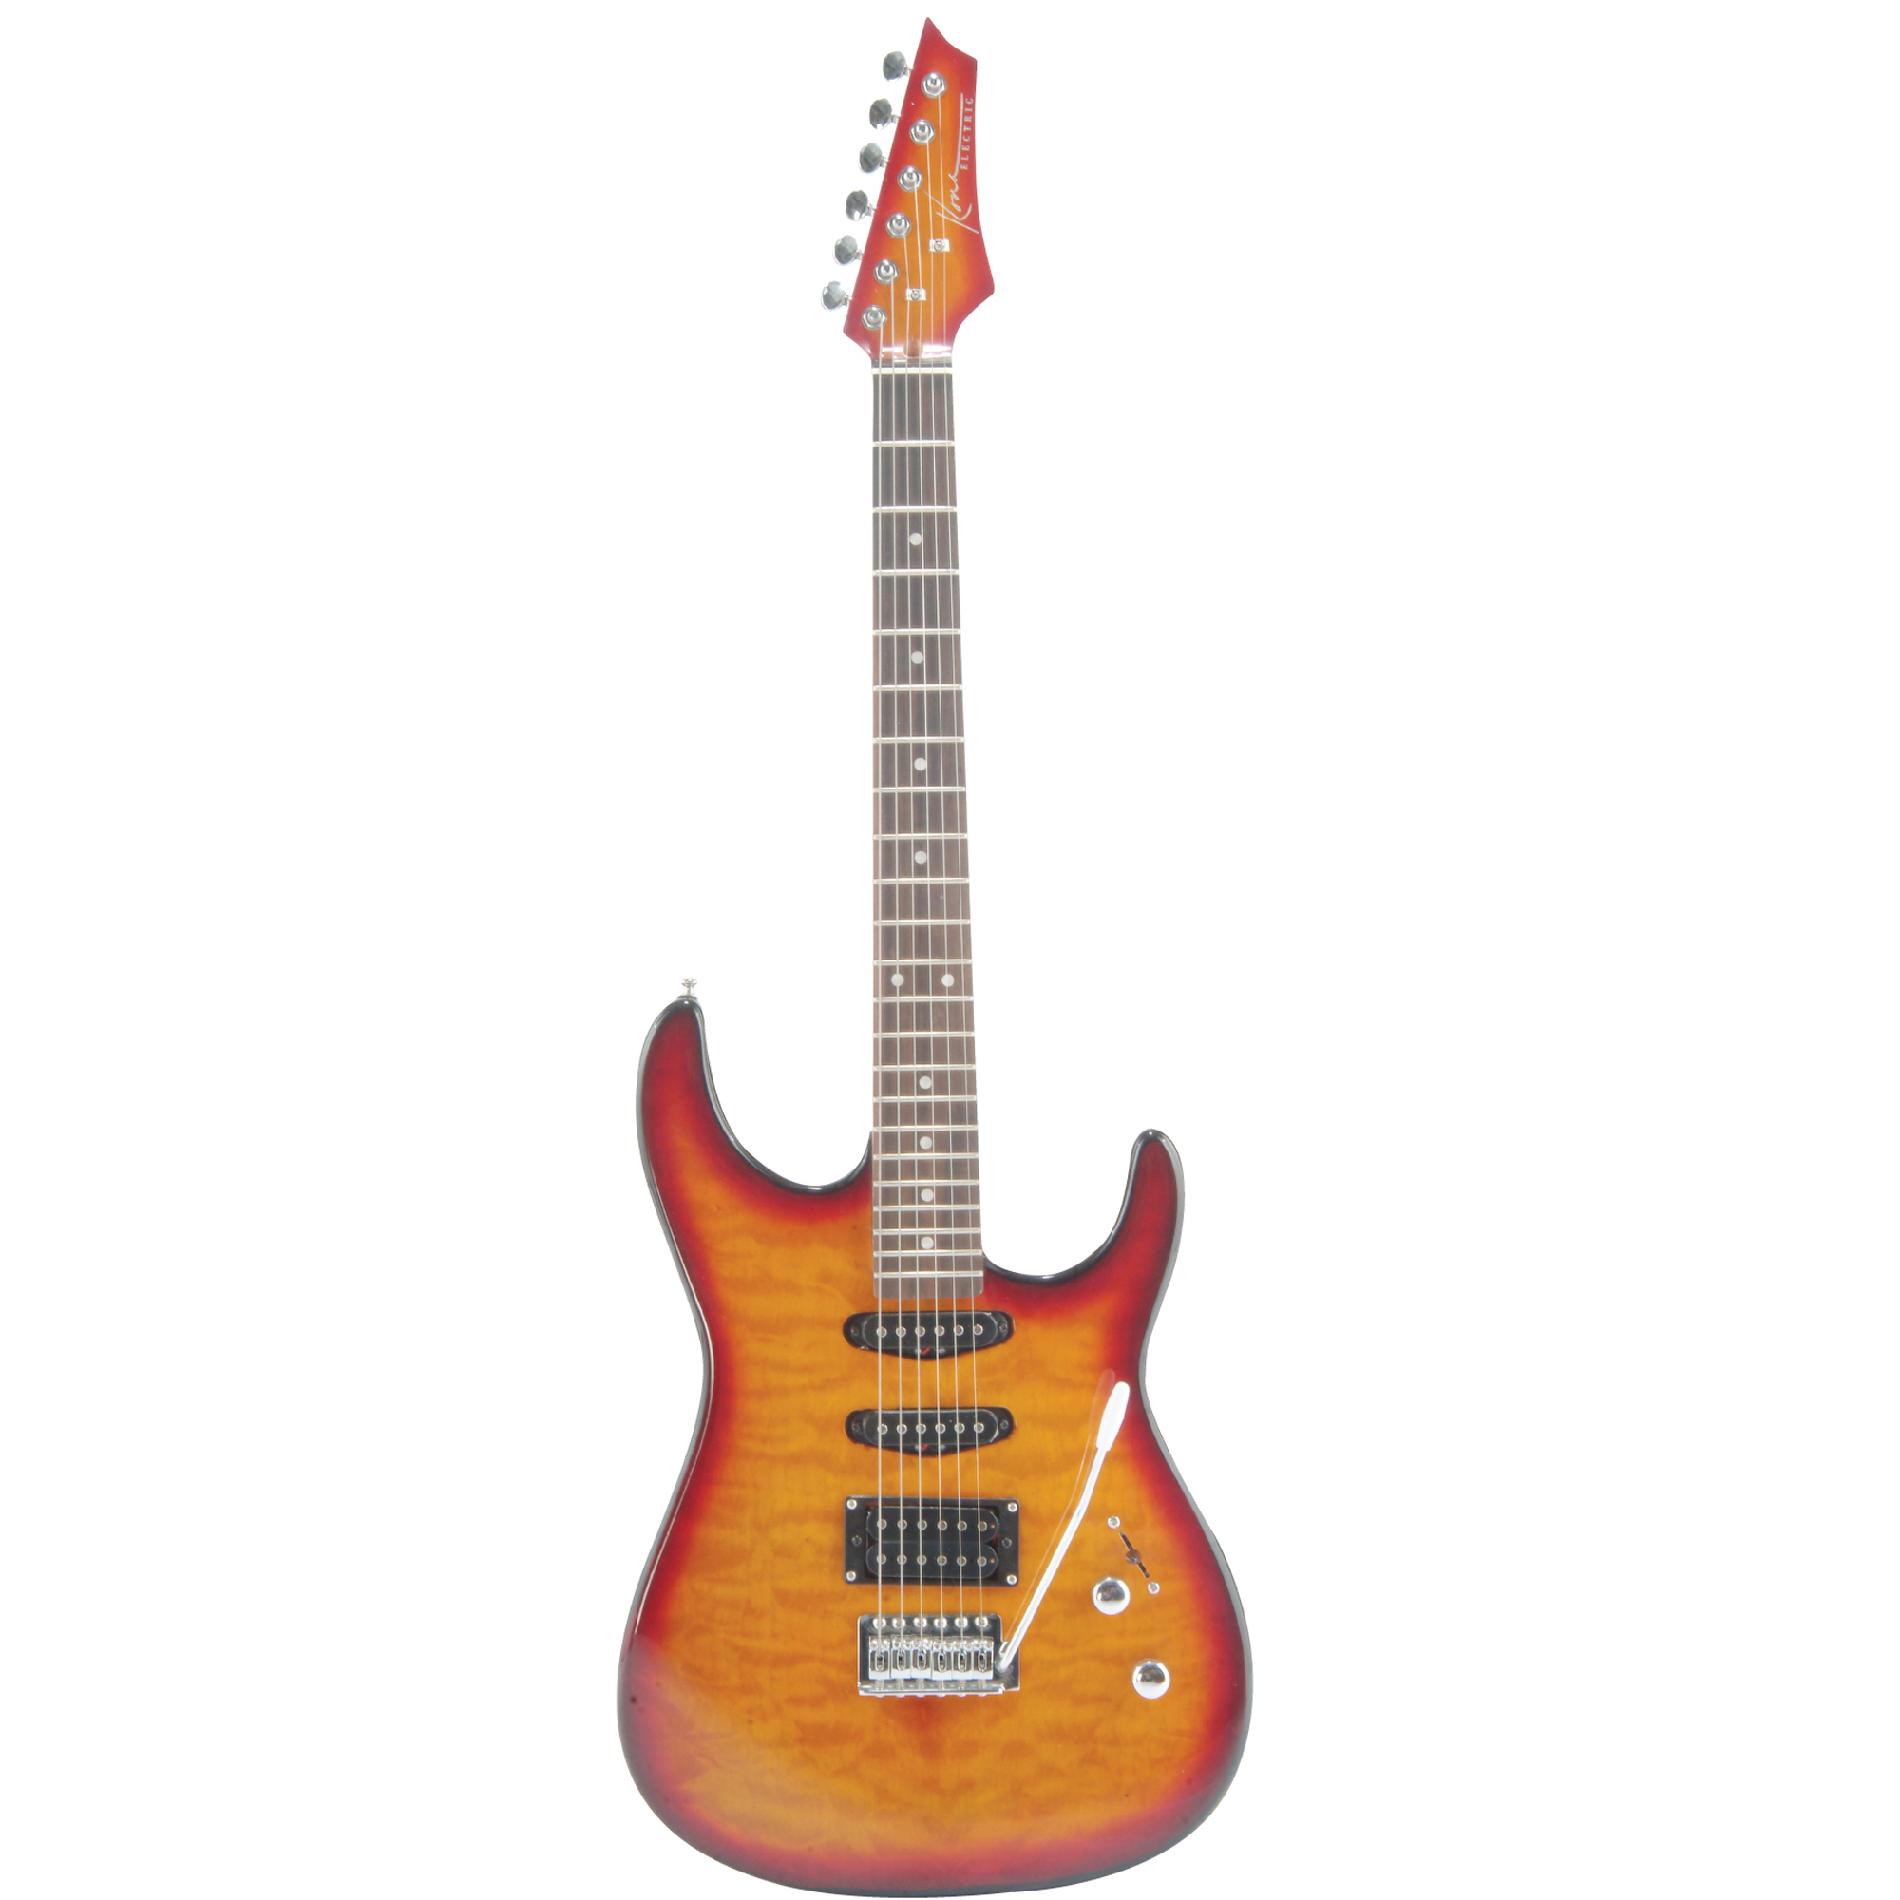 Kona Quilted Top Double Cutaway Electric Guitar in Cherry Sunburst